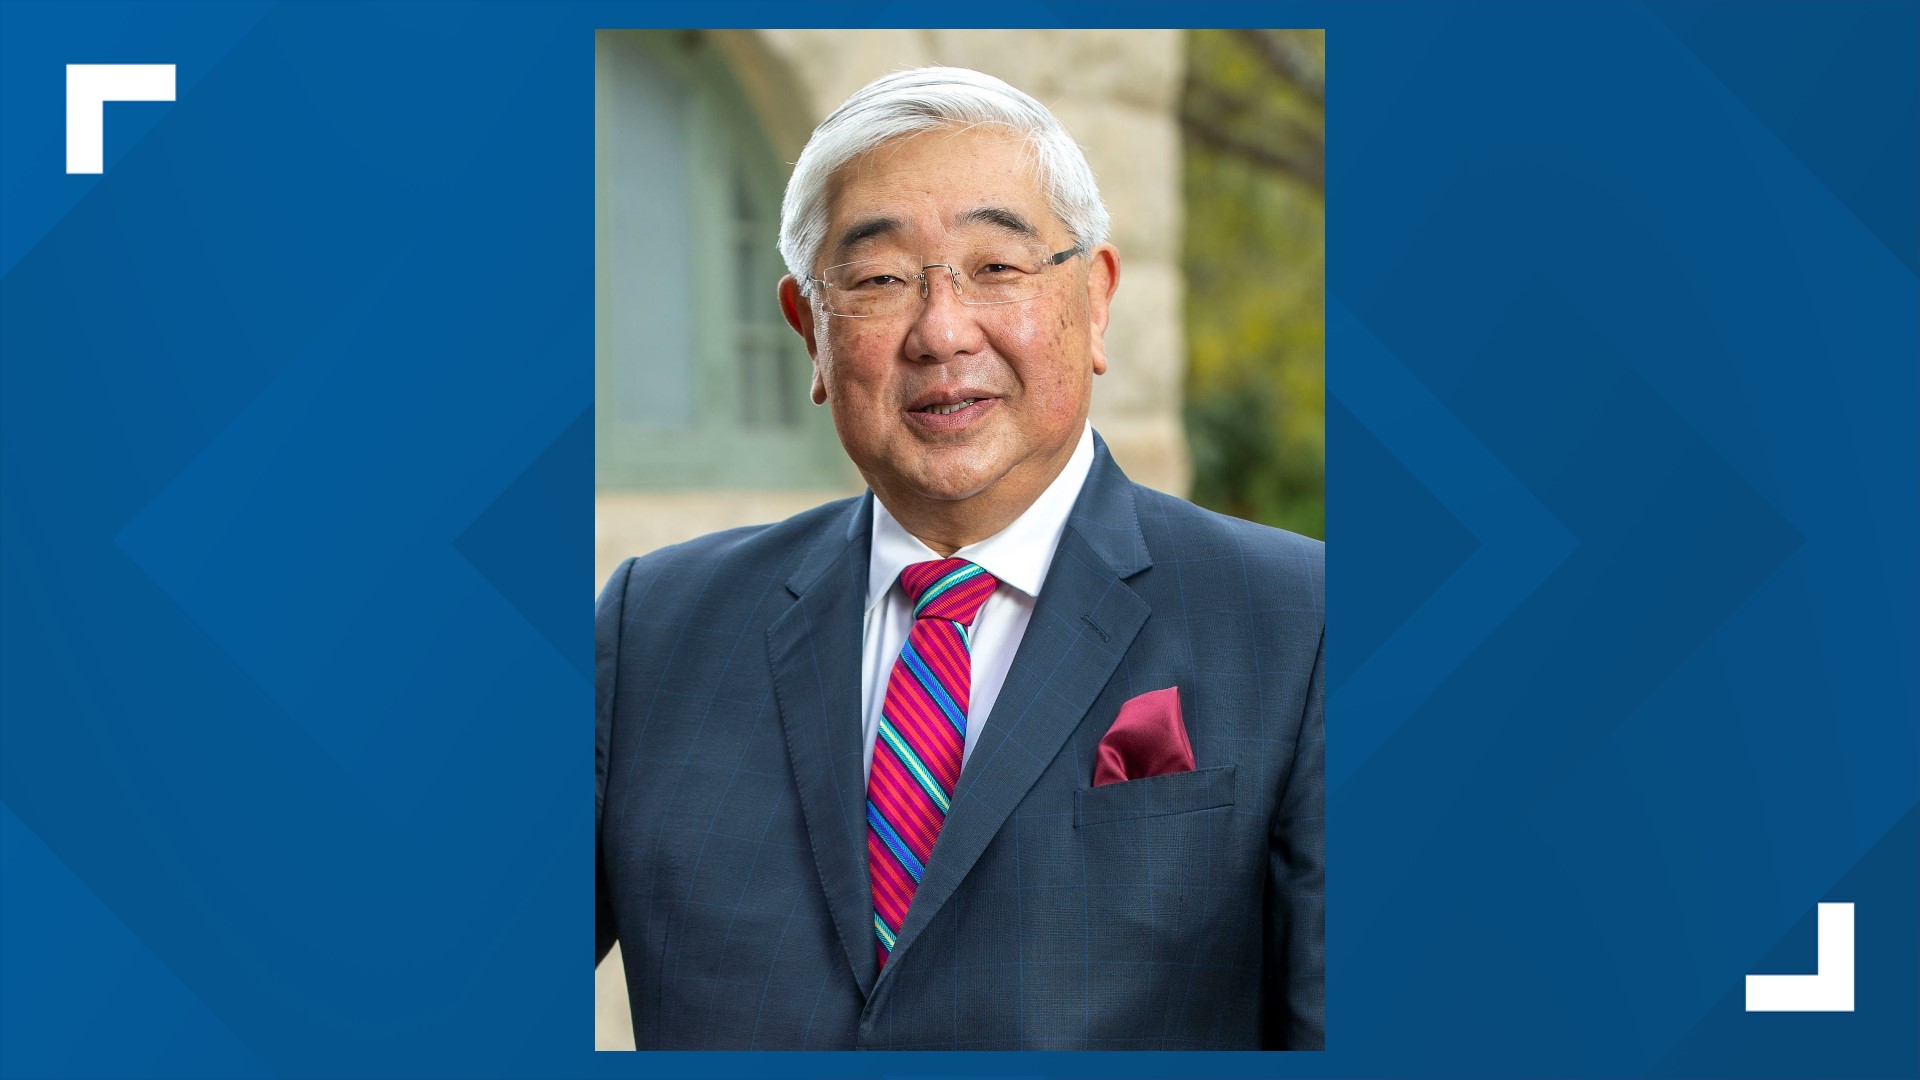 After serving in the San Antonio area's judicial system for 26 years, Peter Sakai is seeking a higher calling.